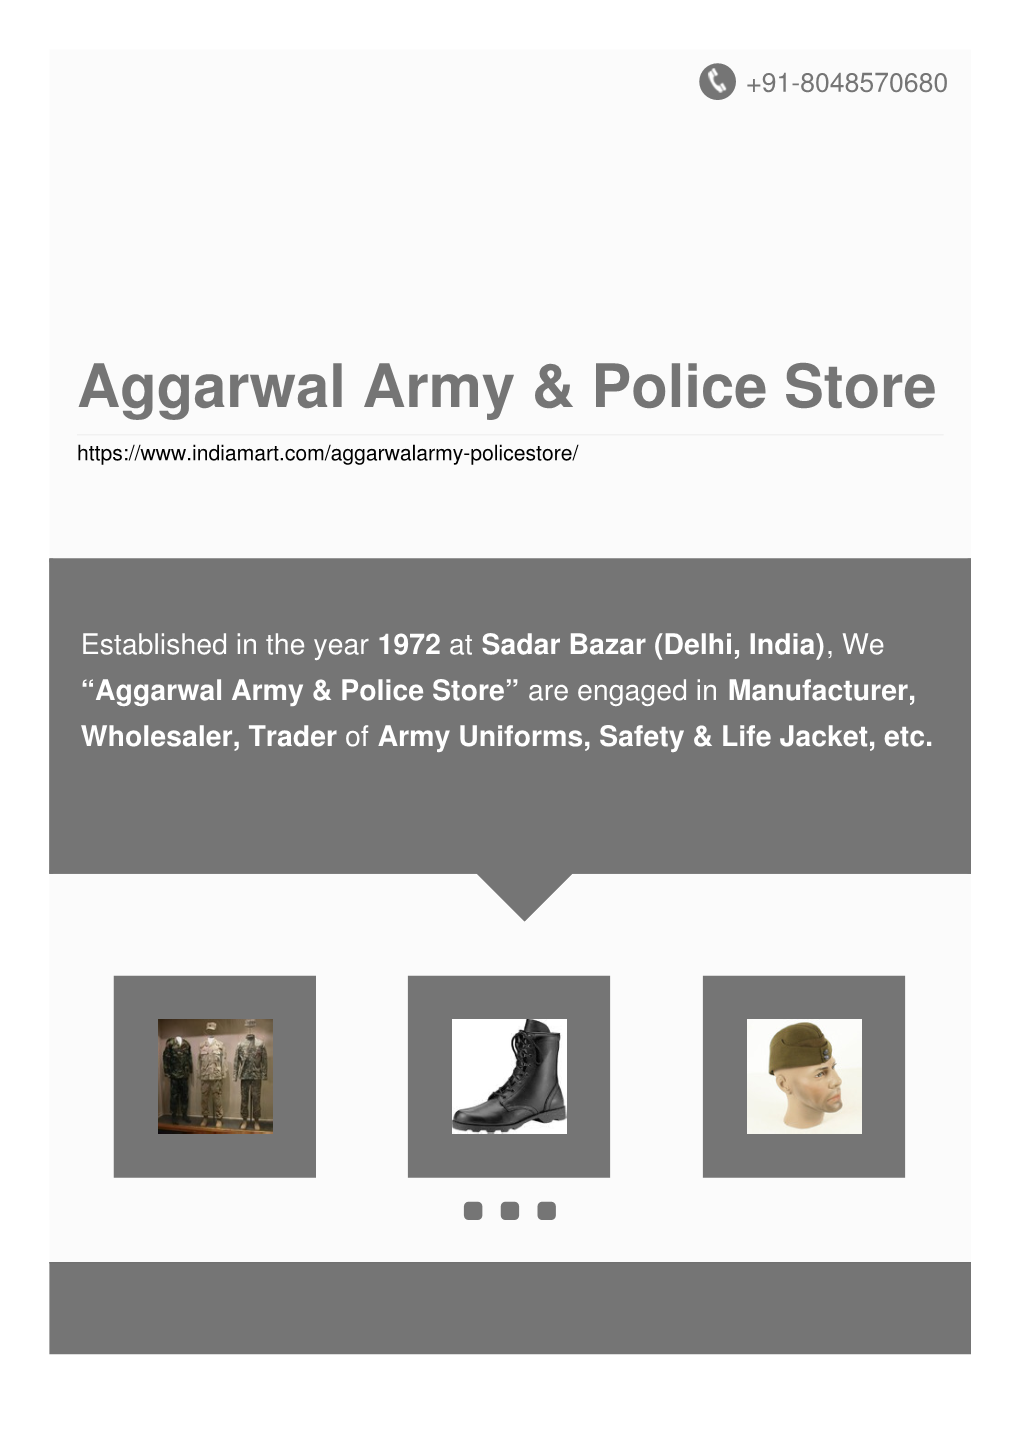 Aggarwal Army & Police Store